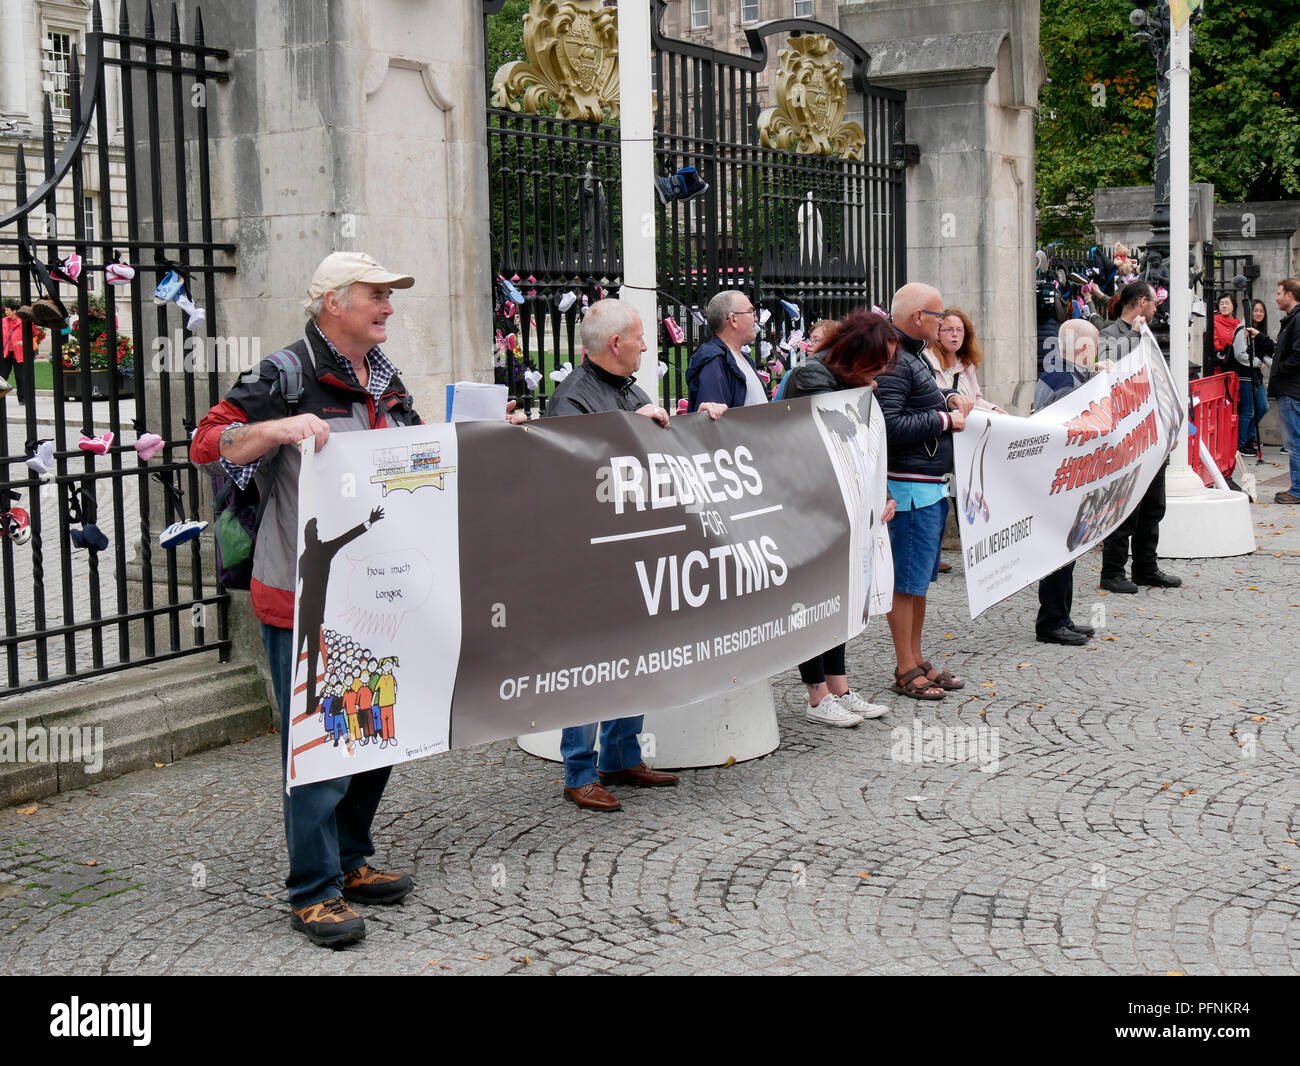 Belfast, Northern Ireland, UK. 22 August 2018. Survivors and Victims of Clerical and Institutional Abuse (SAVIA) held a protest at Belfast City Hall calling for an apology from the Vatican for historical child abuse. The group was joined by other victims and survivors. Pope Francis will visit Ireland over 25th and 26th August but will not visit Northern Ireland. Credit J Orr/Alamy Live News Stock Photo